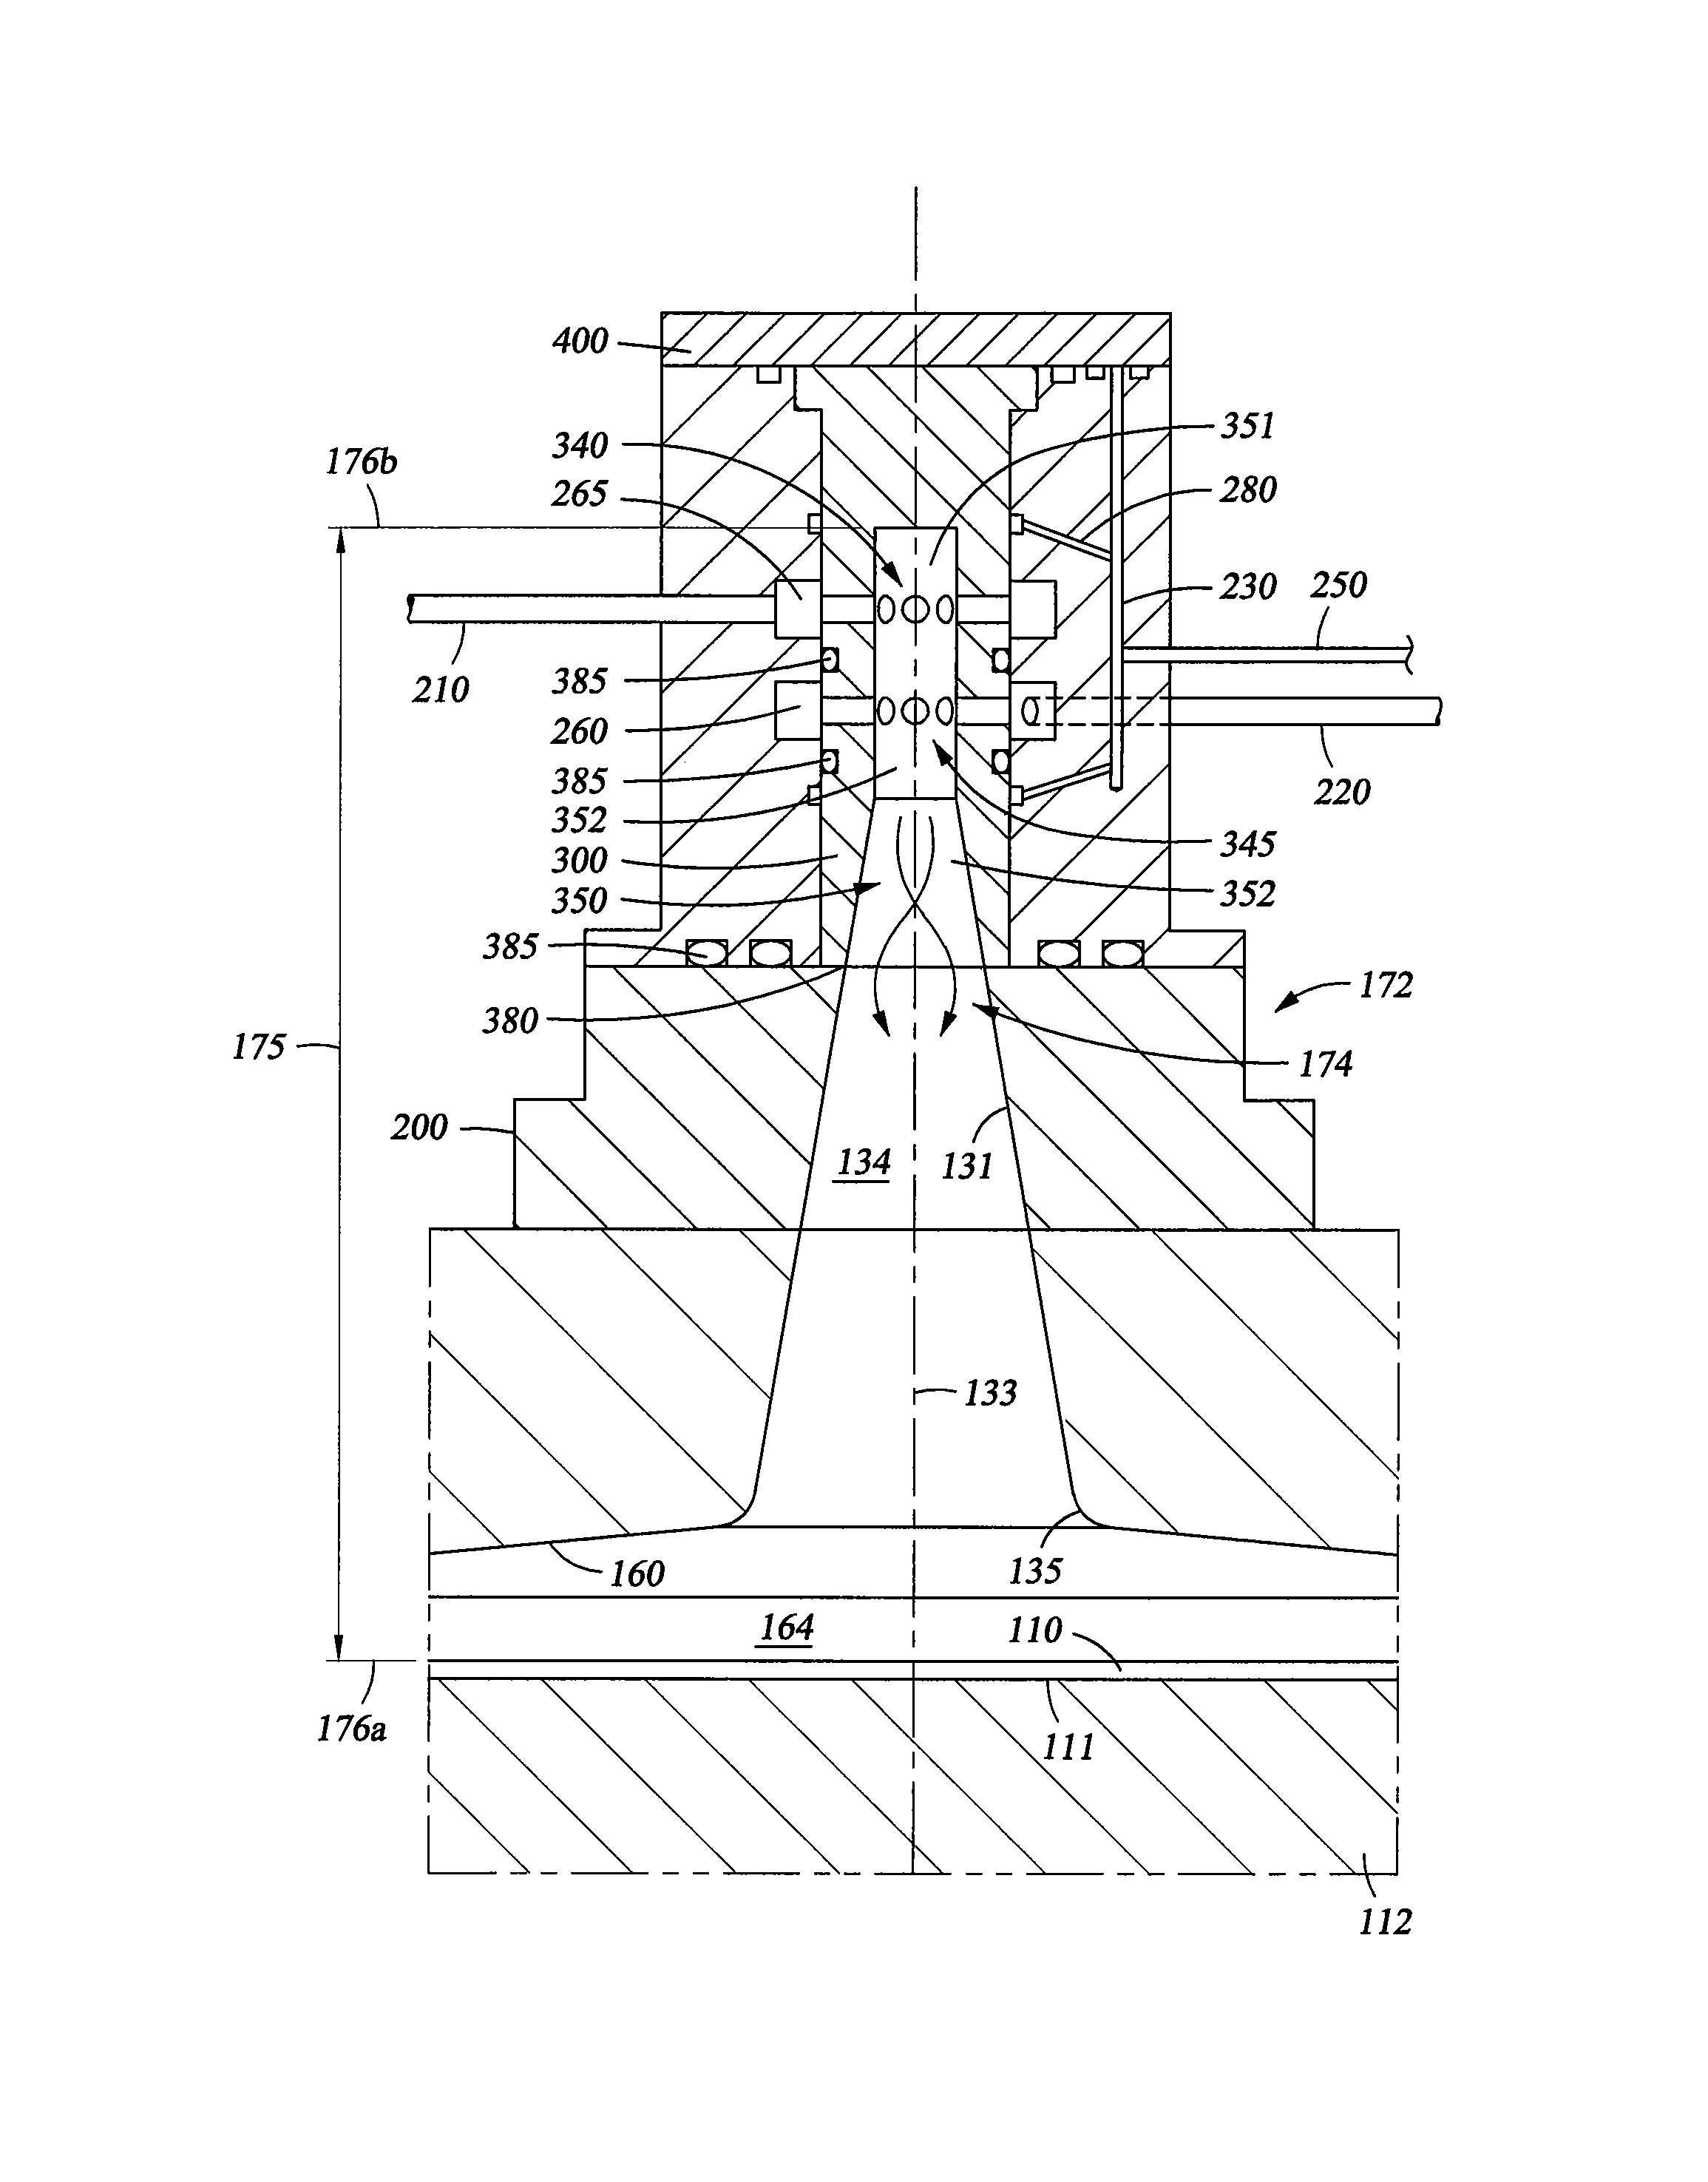 Atomic layer deposition chamber with multi inject